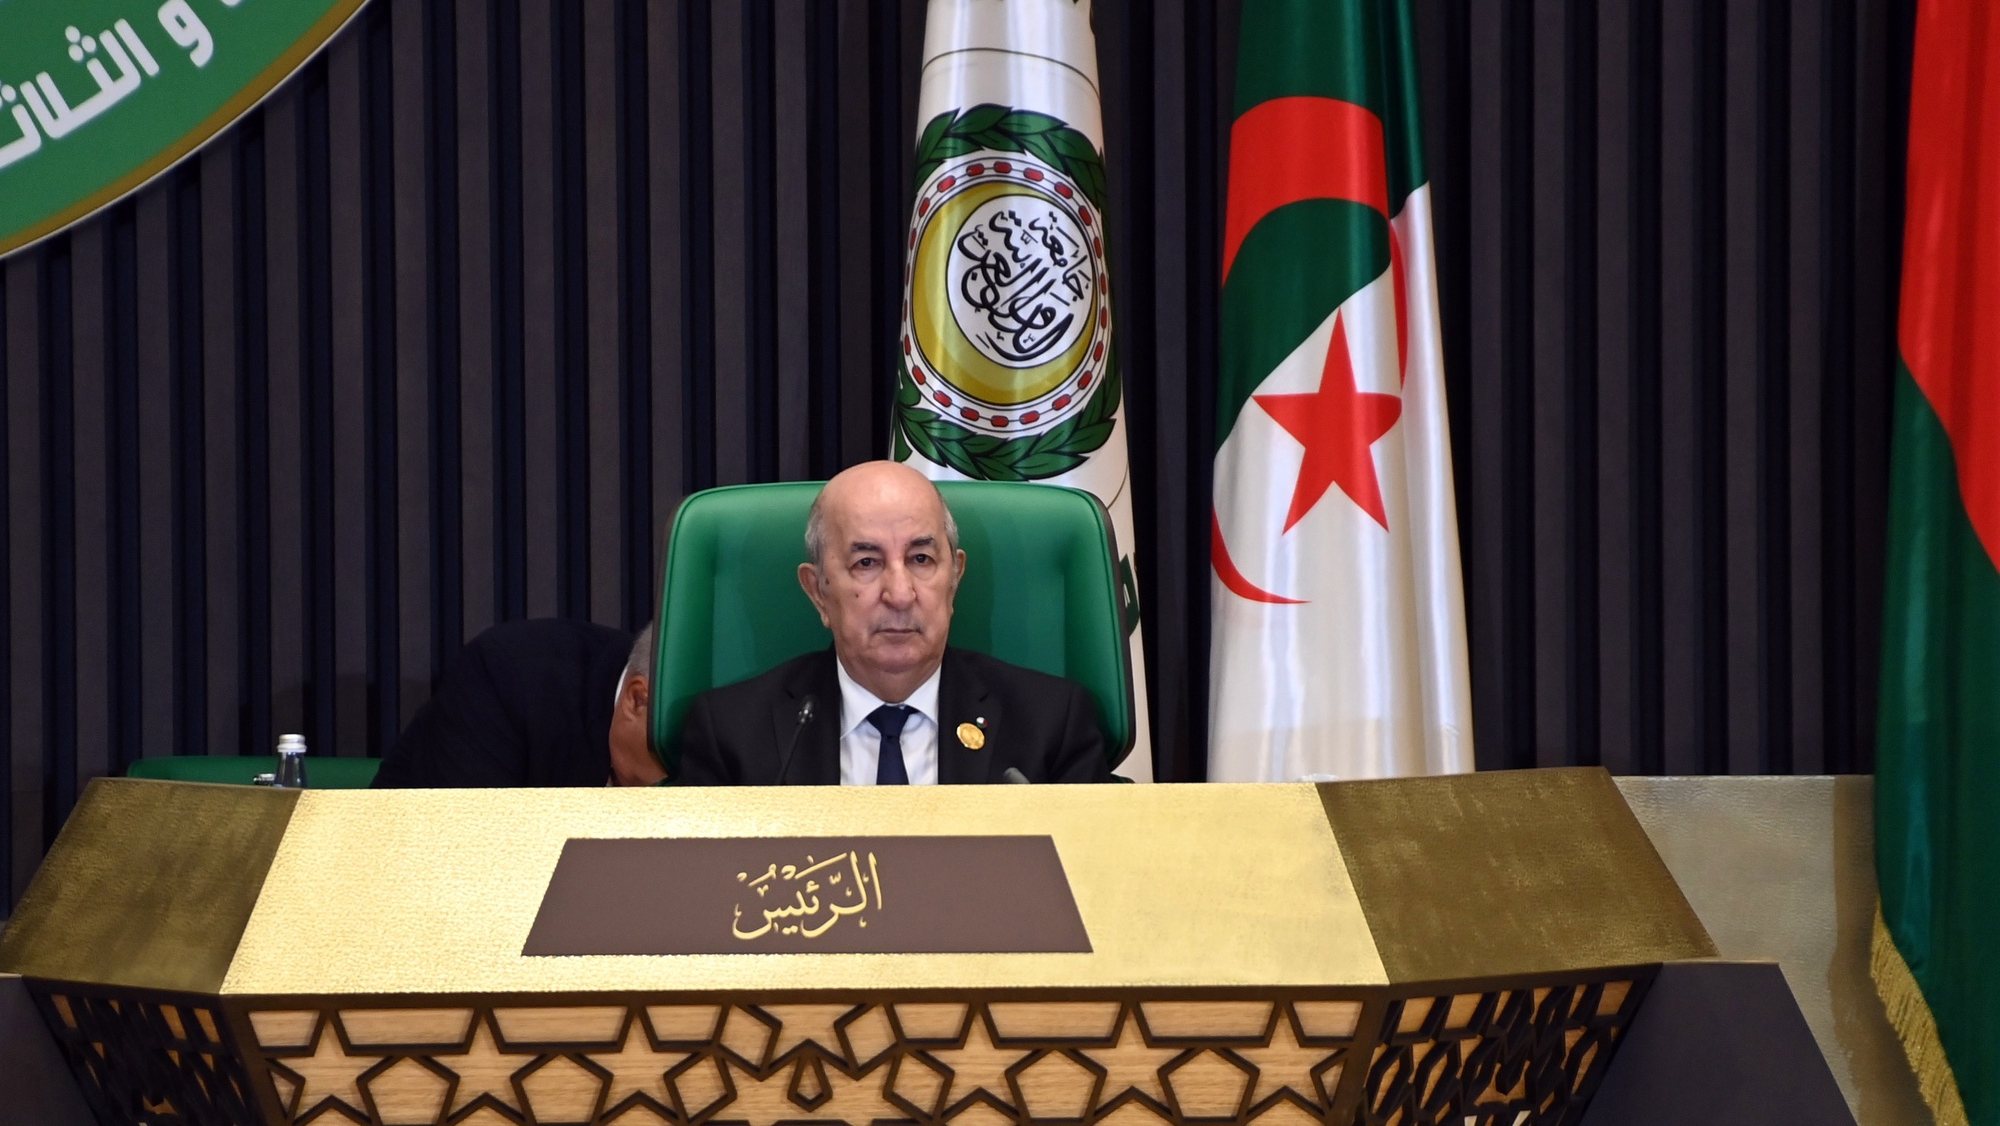 epa10281780 A handout photo made available by the Algerian presidency press service shows Algerian President Abdelmadjid Tebboune attending the closing ceremony of the 31st Summit of the Arab League in Algiers, Algeria, 02 November 2022. The 31st Summit of the Arab League takes place in Algiers on 01 and 02 November.  EPA/ALGERIAN PRESIDENCY HANDOUT  HANDOUT EDITORIAL USE ONLY/NO SALES